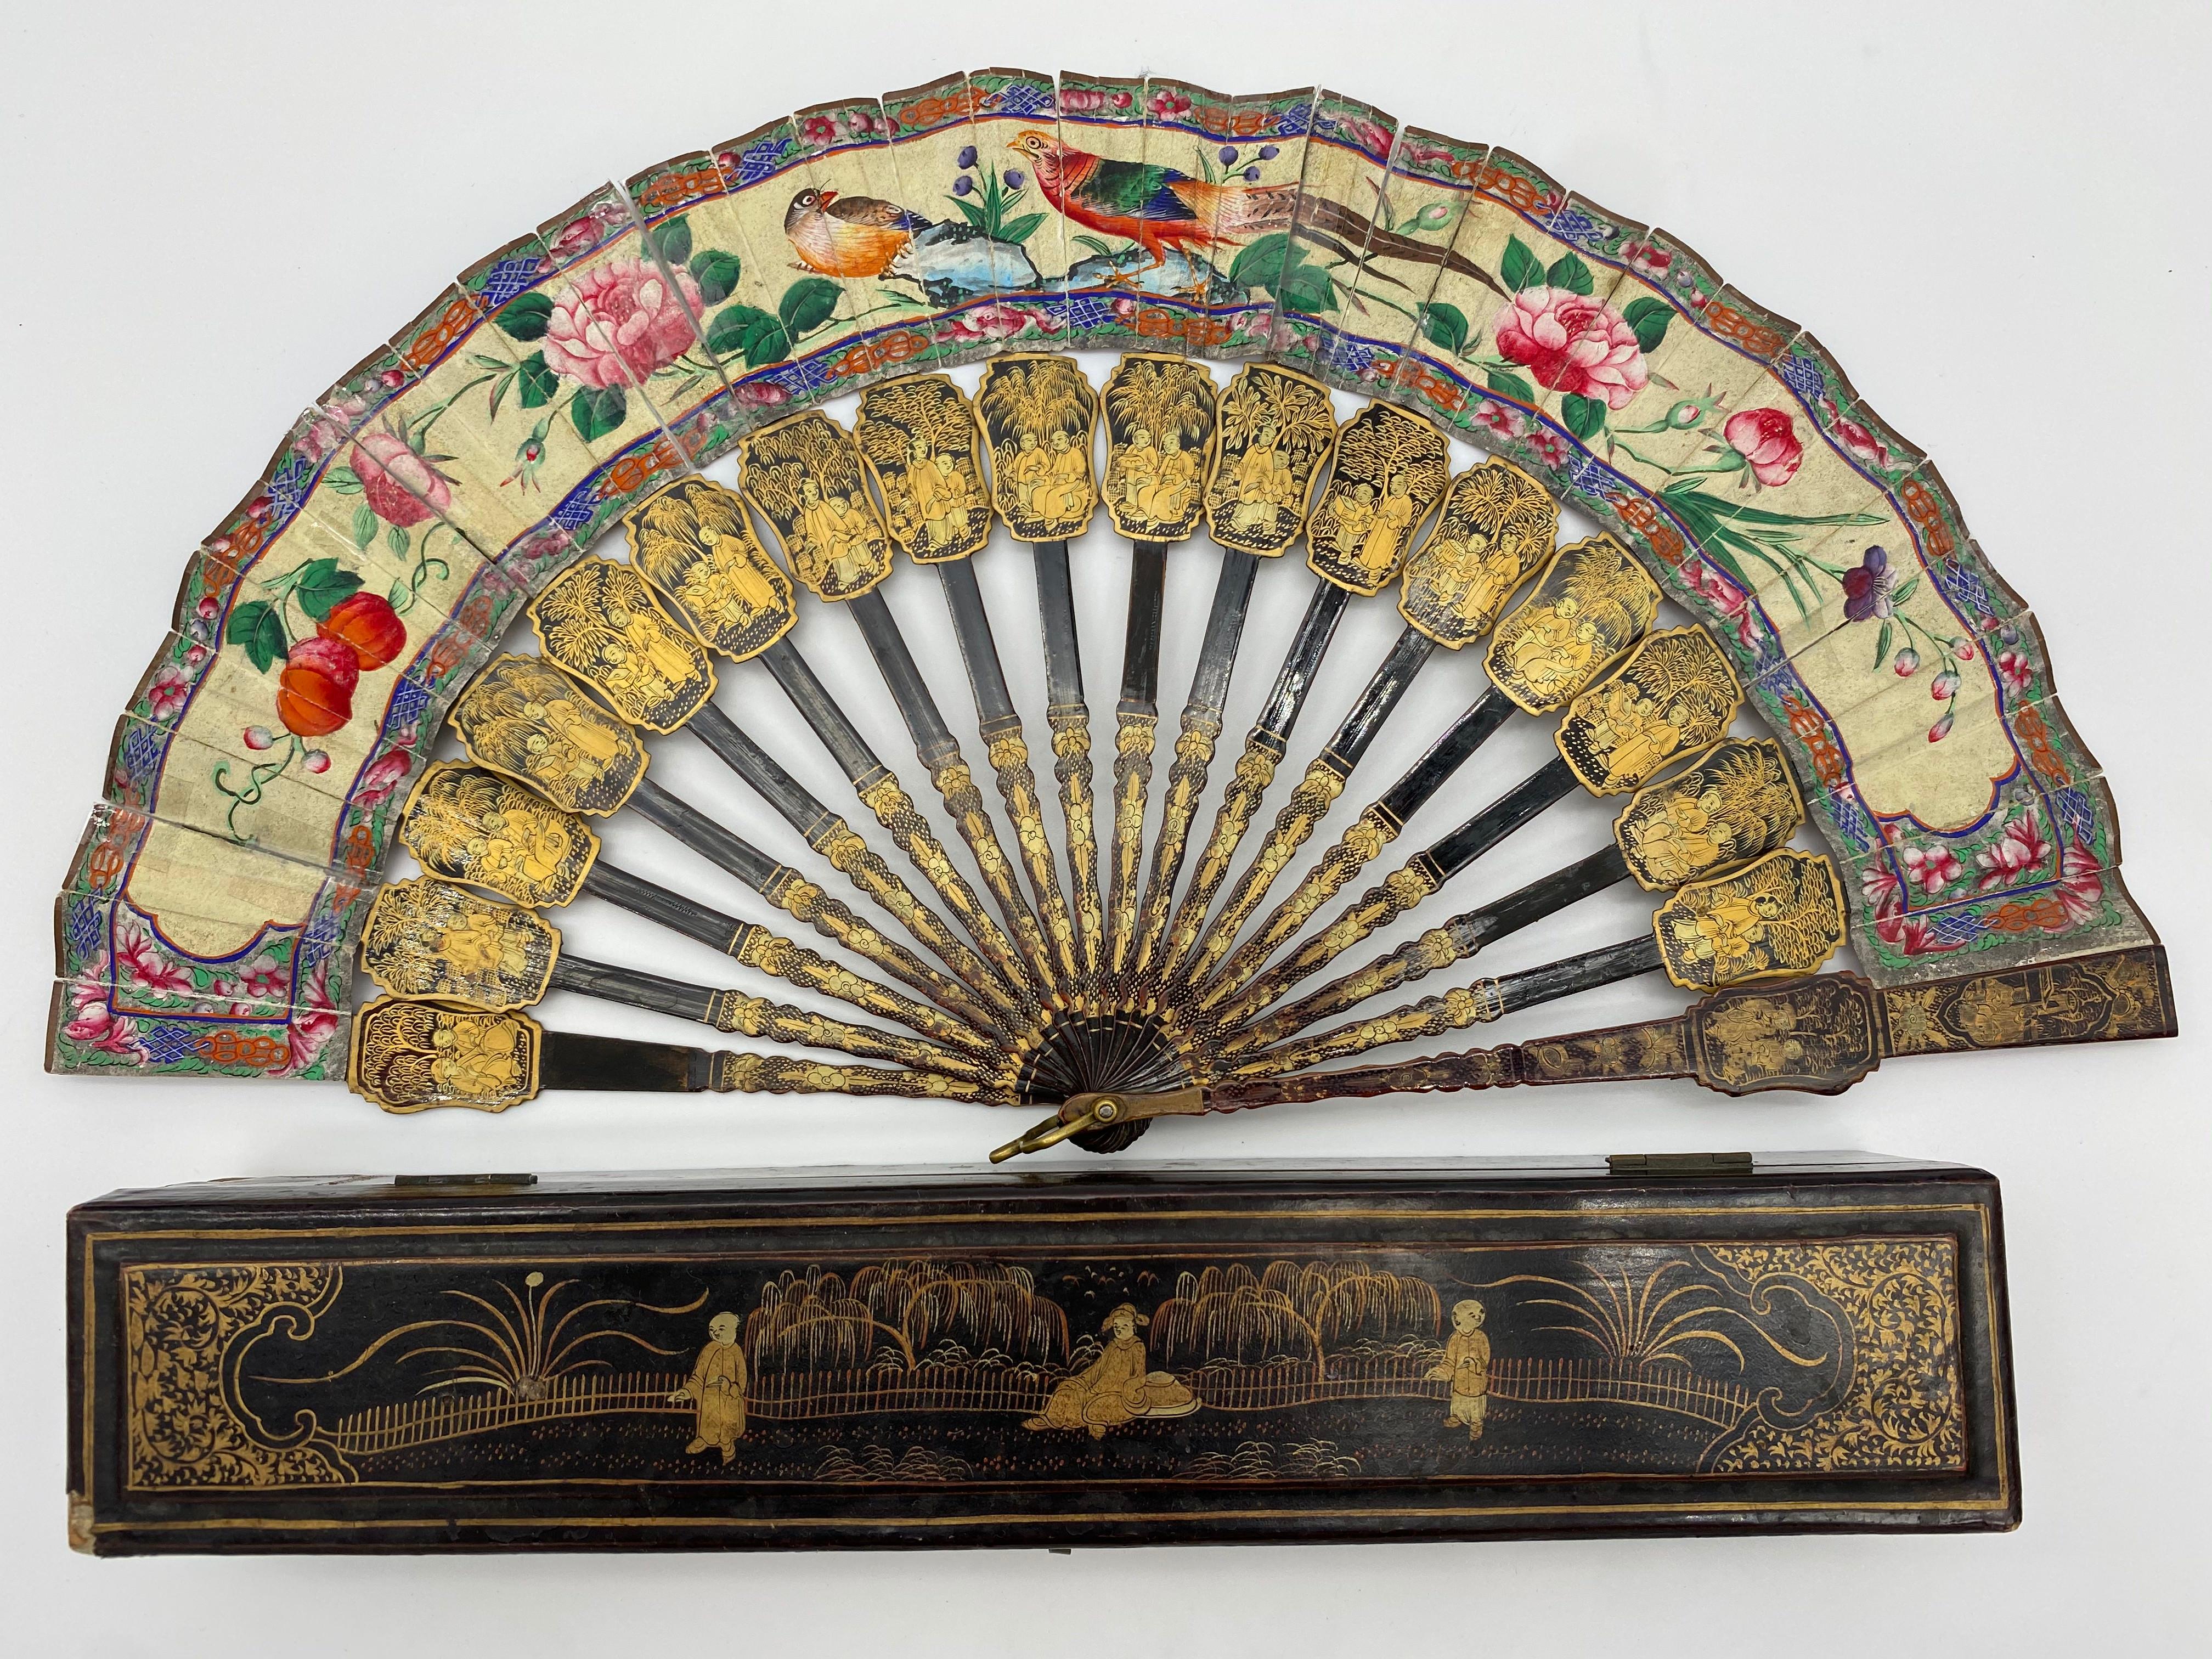 Antique 19th century hand painted Chinese fan with mother of pearl faces, Qing dynasty, the fan features black and gold lacquered handled a colorful screen with a figural, hand painted, scene with antique lacquer fan box. Fan is 16inch x 8 x 1.5,